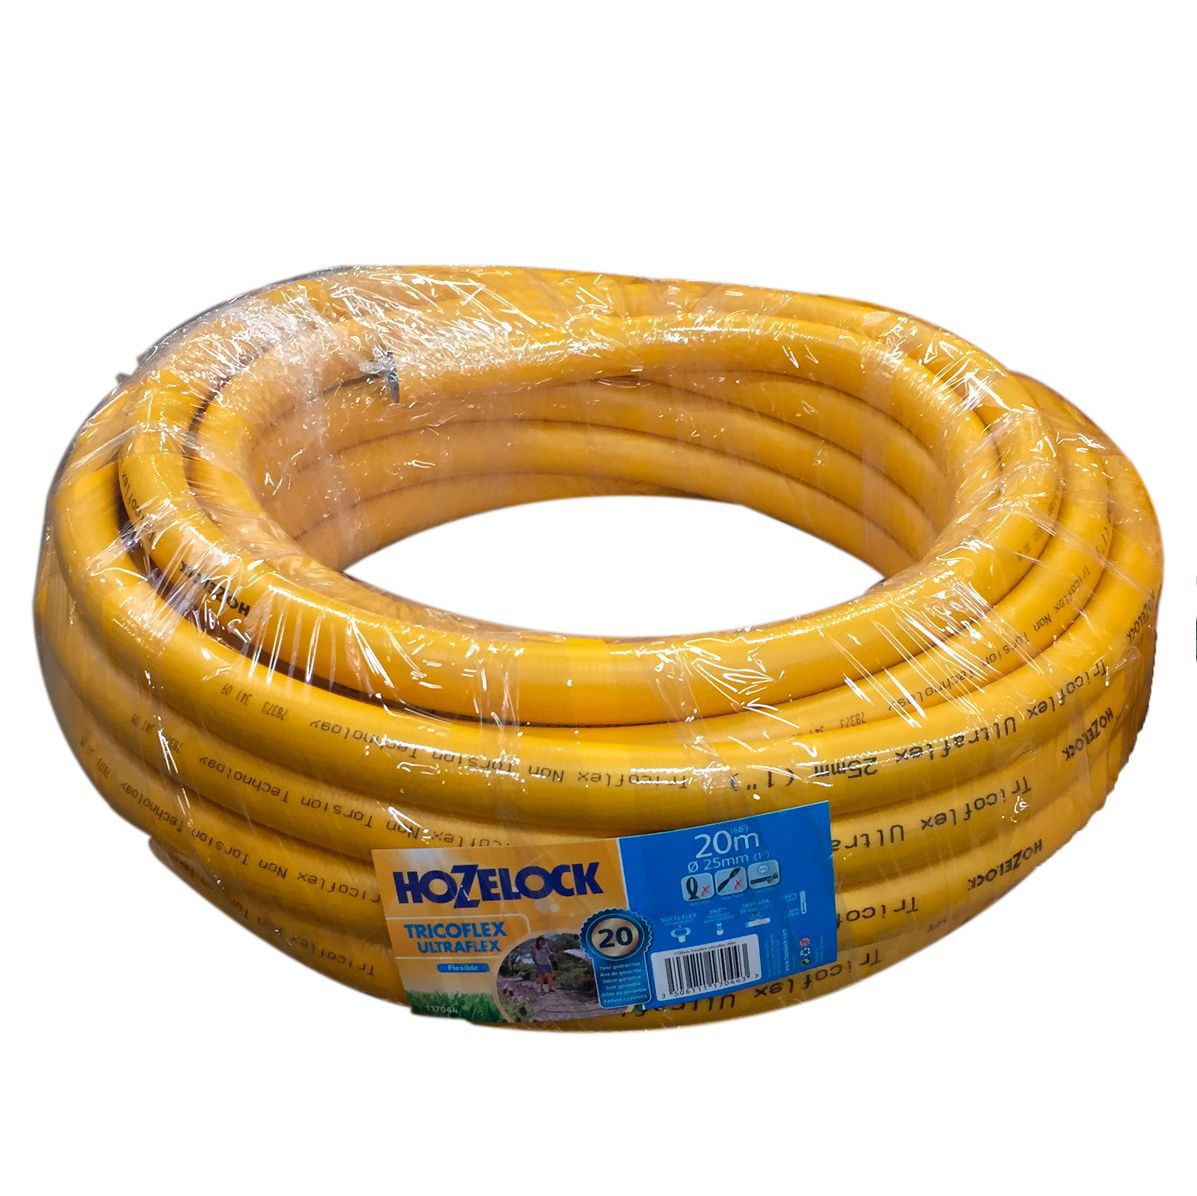 Hozelock 6765 0000 Yellow 5-layer reinforced hose pipe (L)10m